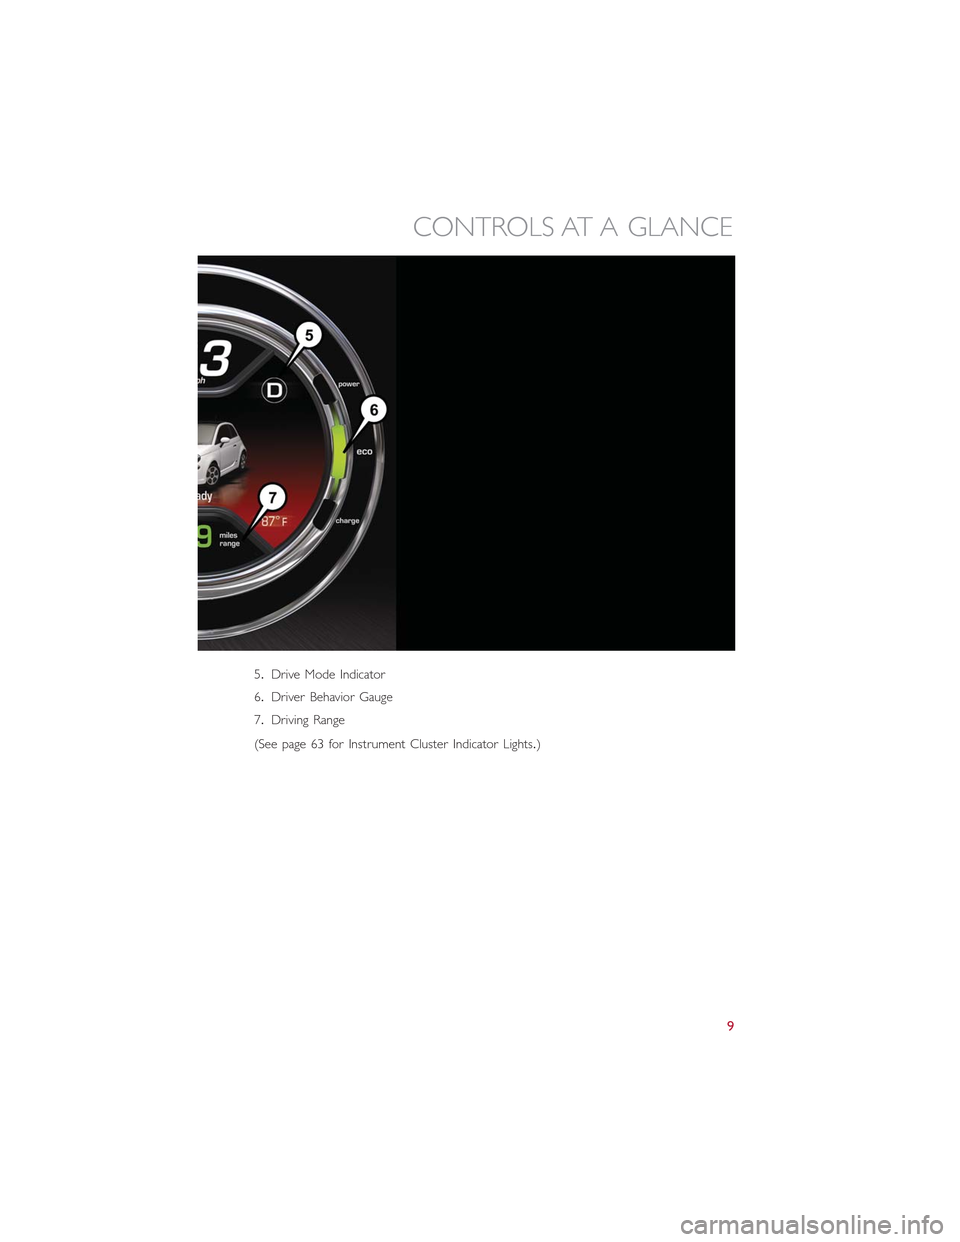 FIAT 500E 2015 2.G User Guide 5.Drive Mode Indicator
6.Driver Behavior Gauge
7.Driving Range
(See page 63 for Instrument Cluster Indicator Lights.)
CONTROLS AT A GLANCE
9 